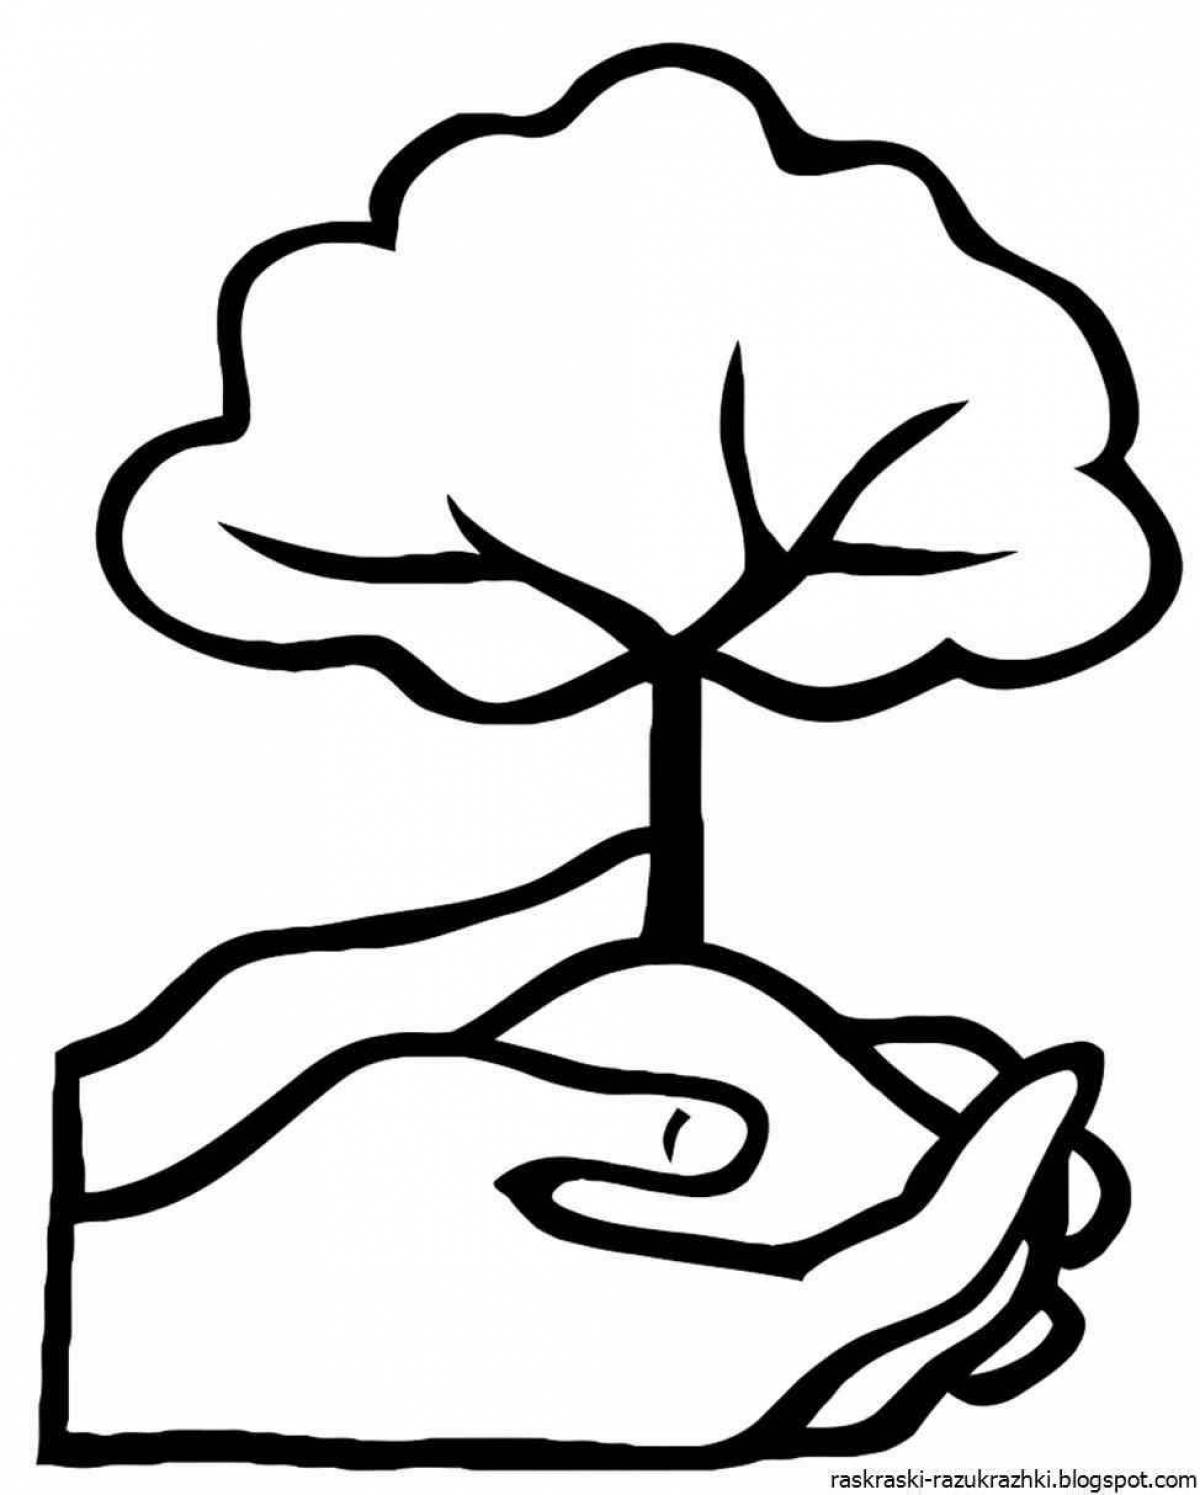 Stimulating environmental signs coloring pages for kids